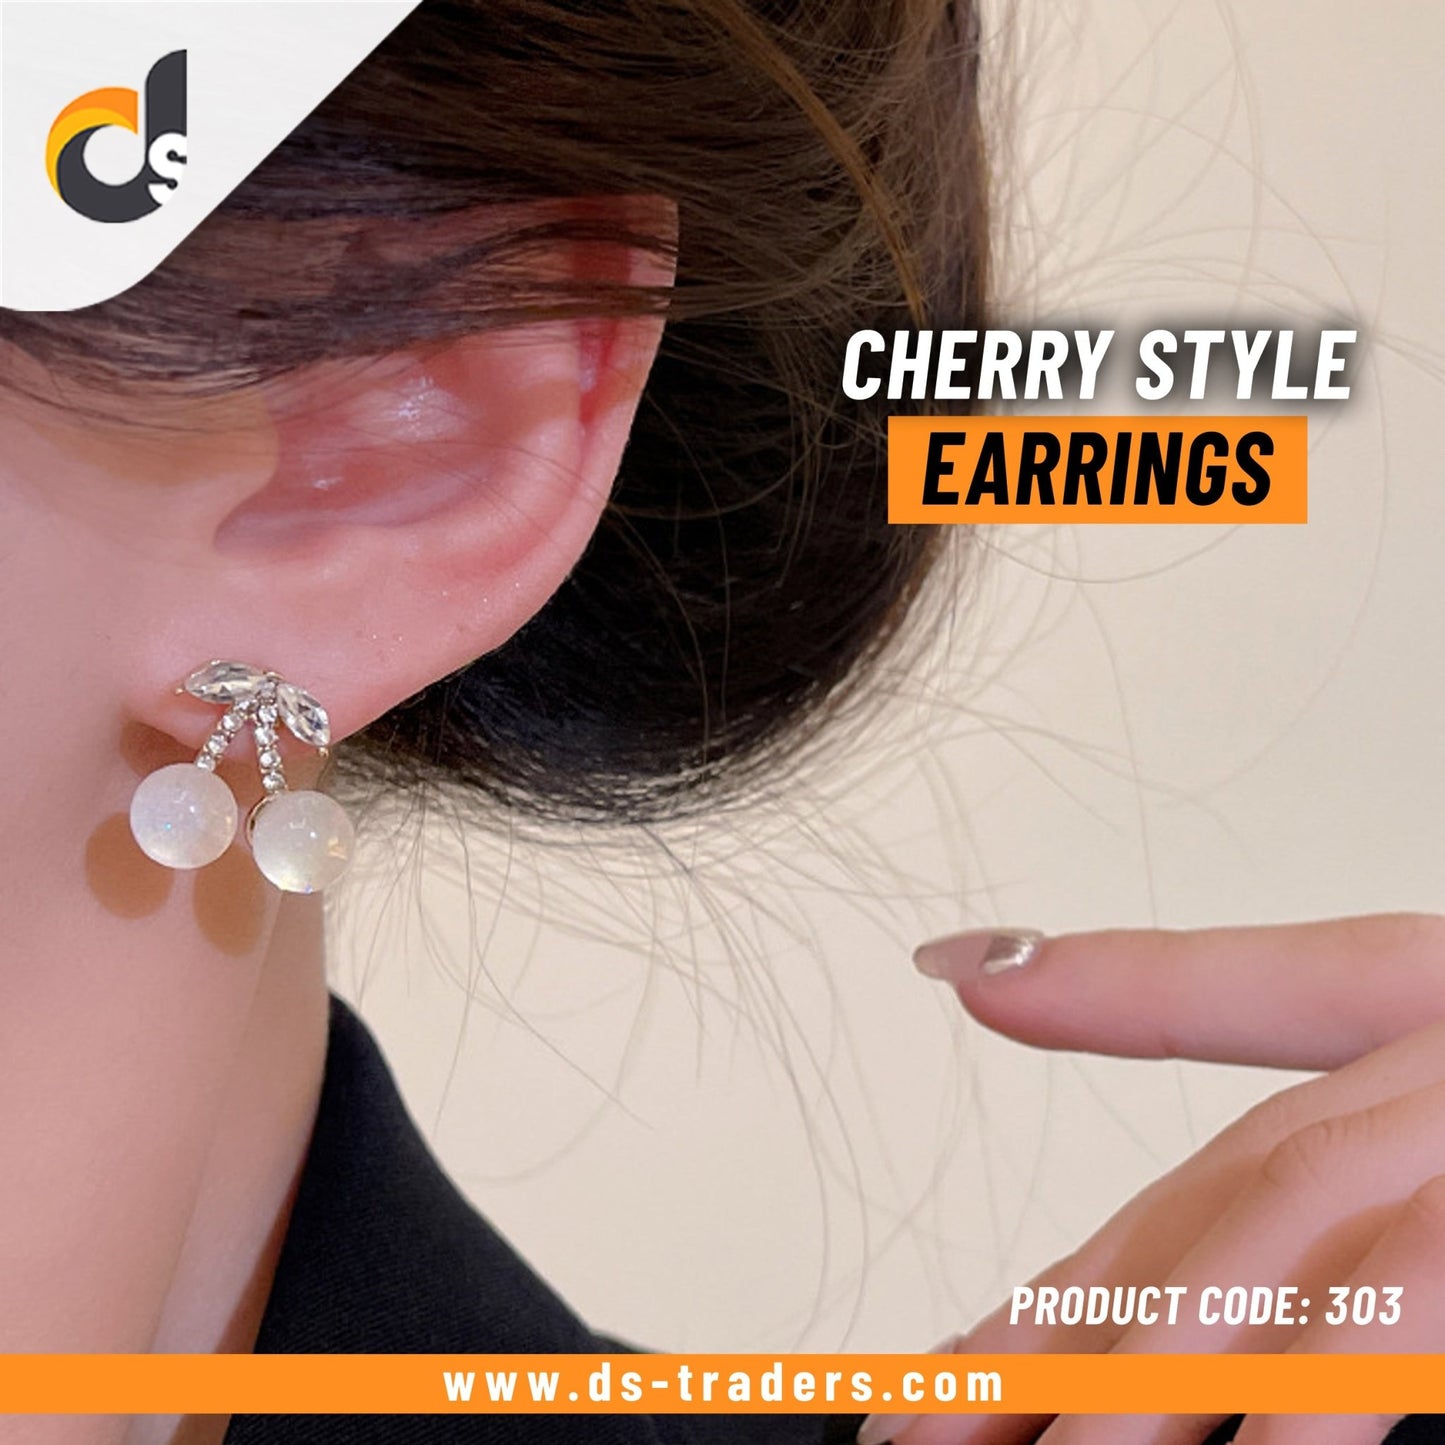 Cherry Style Earrings - DS Traders